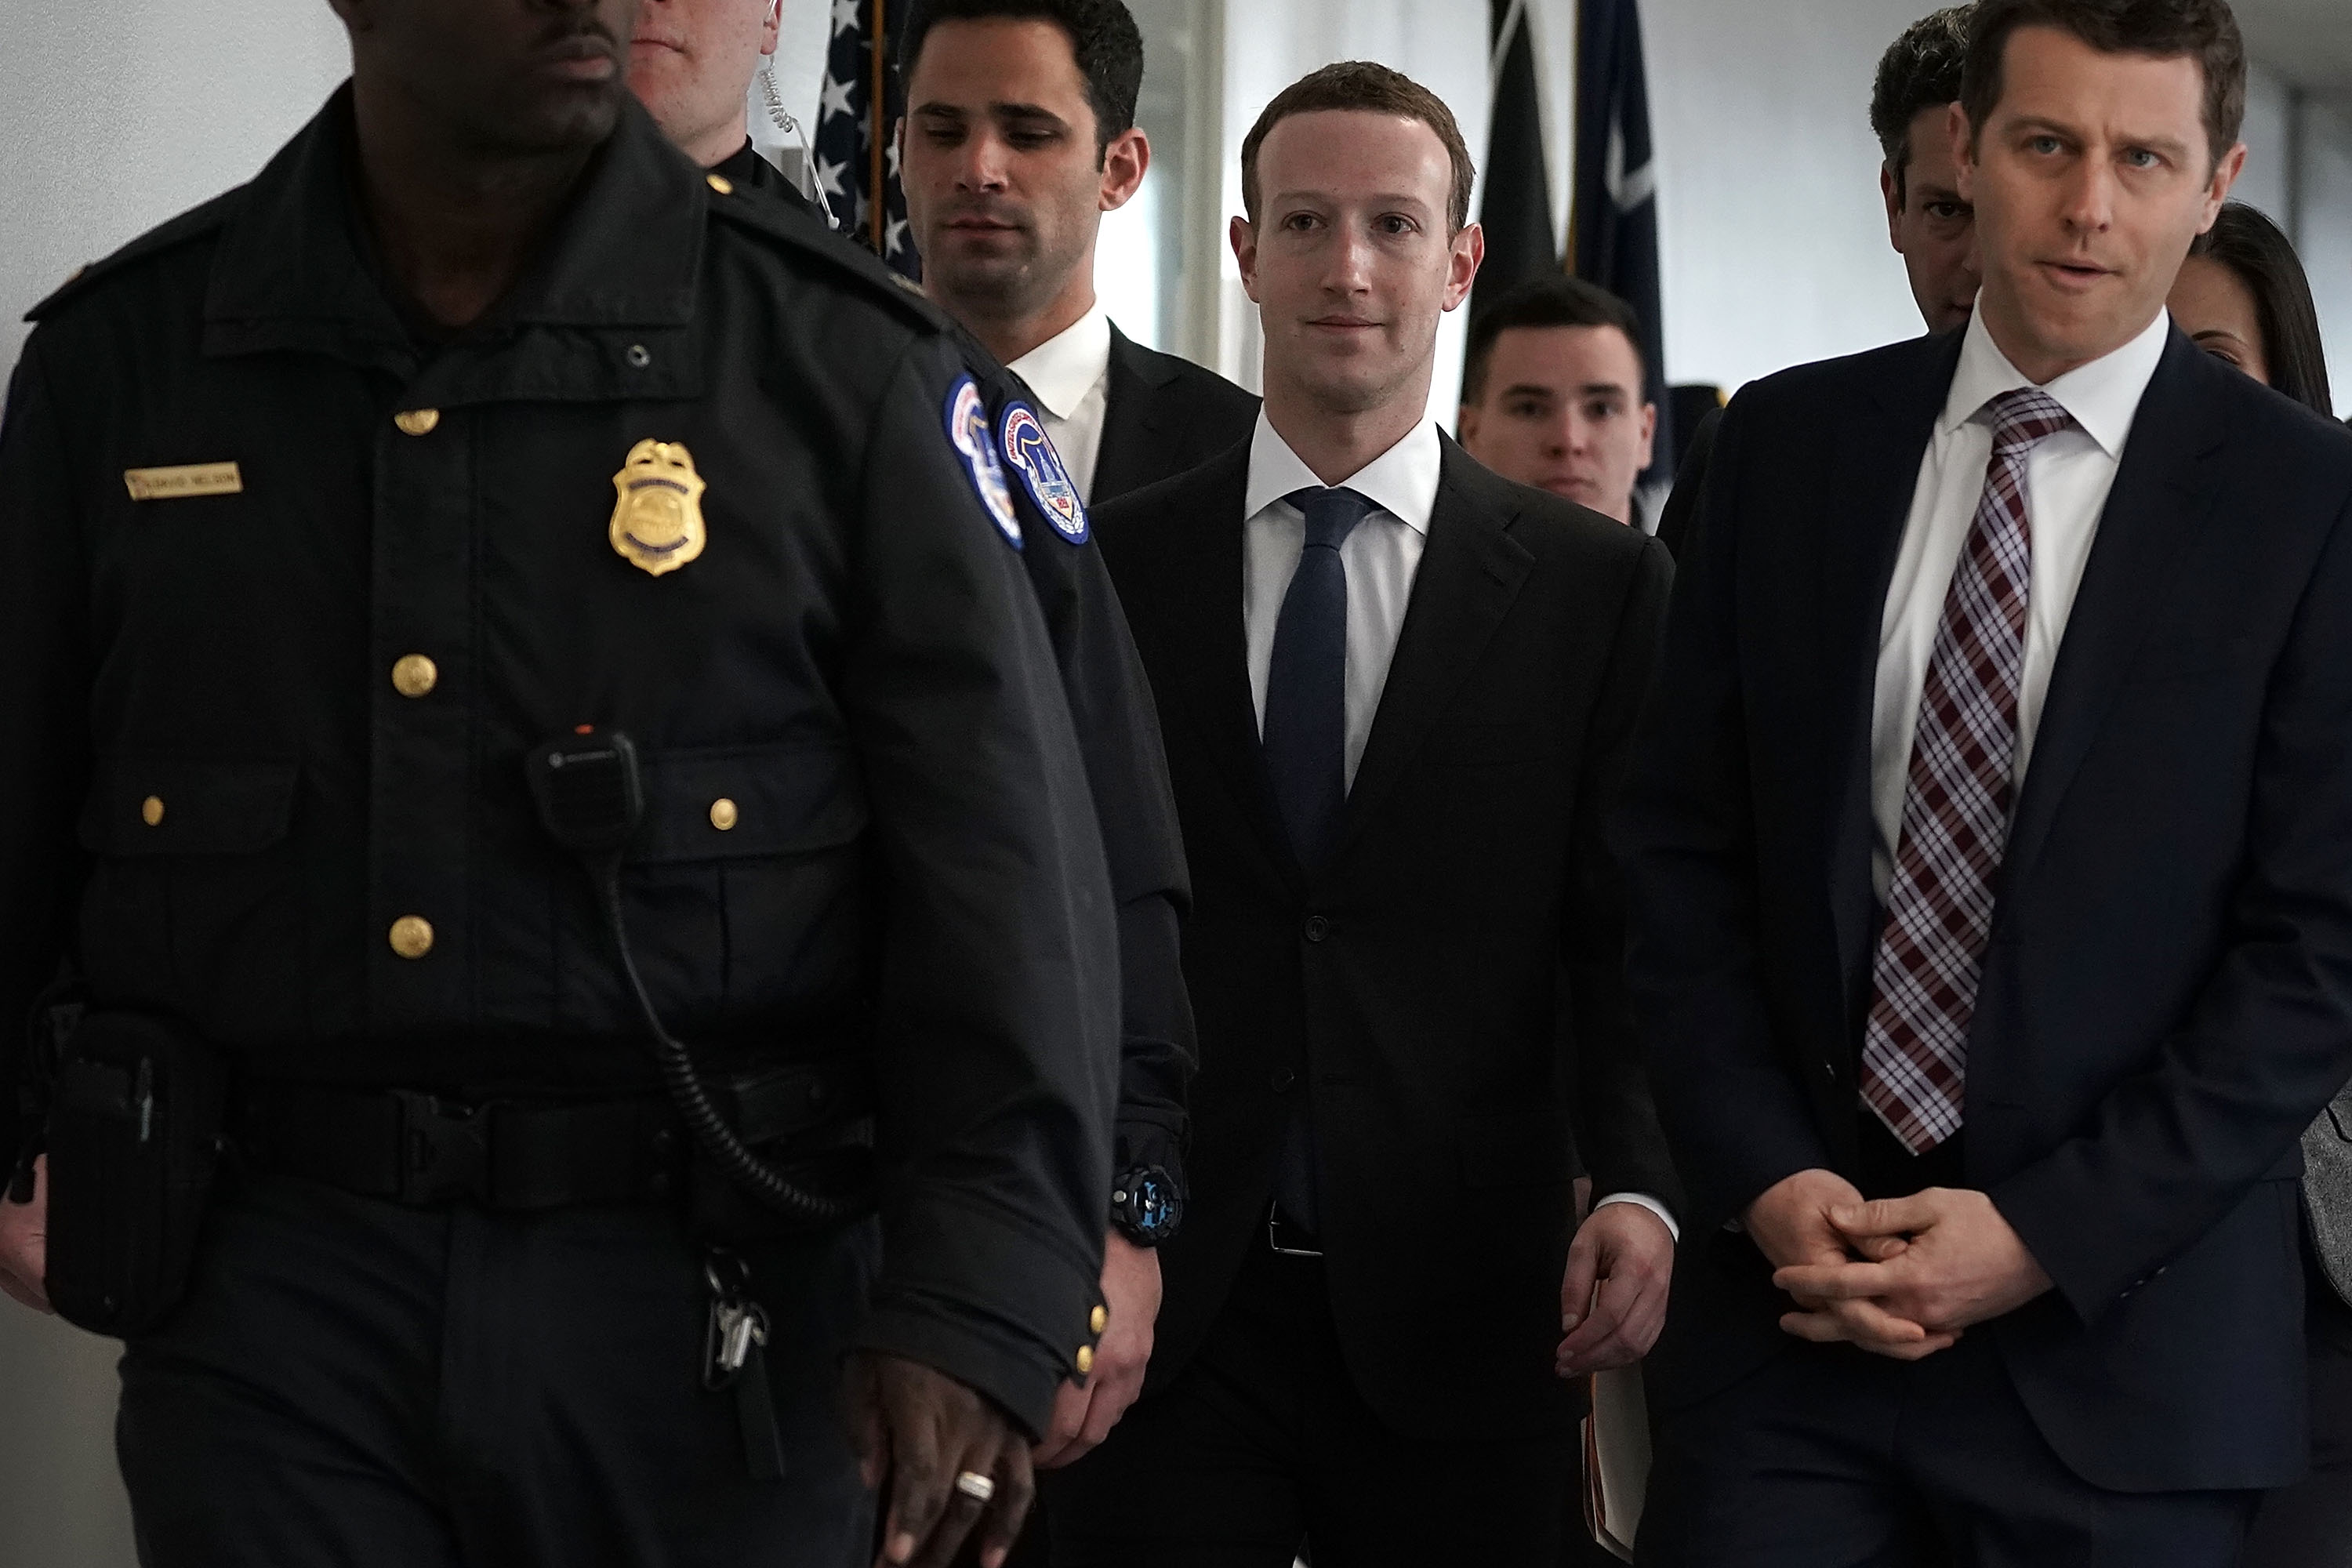 Facebook CEO Mark Zuckerberg (C) arrives at a meeting with U.S. Sen. Bill Nelson (D-FL), ranking member of the Senate Committee on Commerce, Science, and Transportation, April 9, 2018 in Washington, DC. (Alex Wong&mdash;Getty Images)